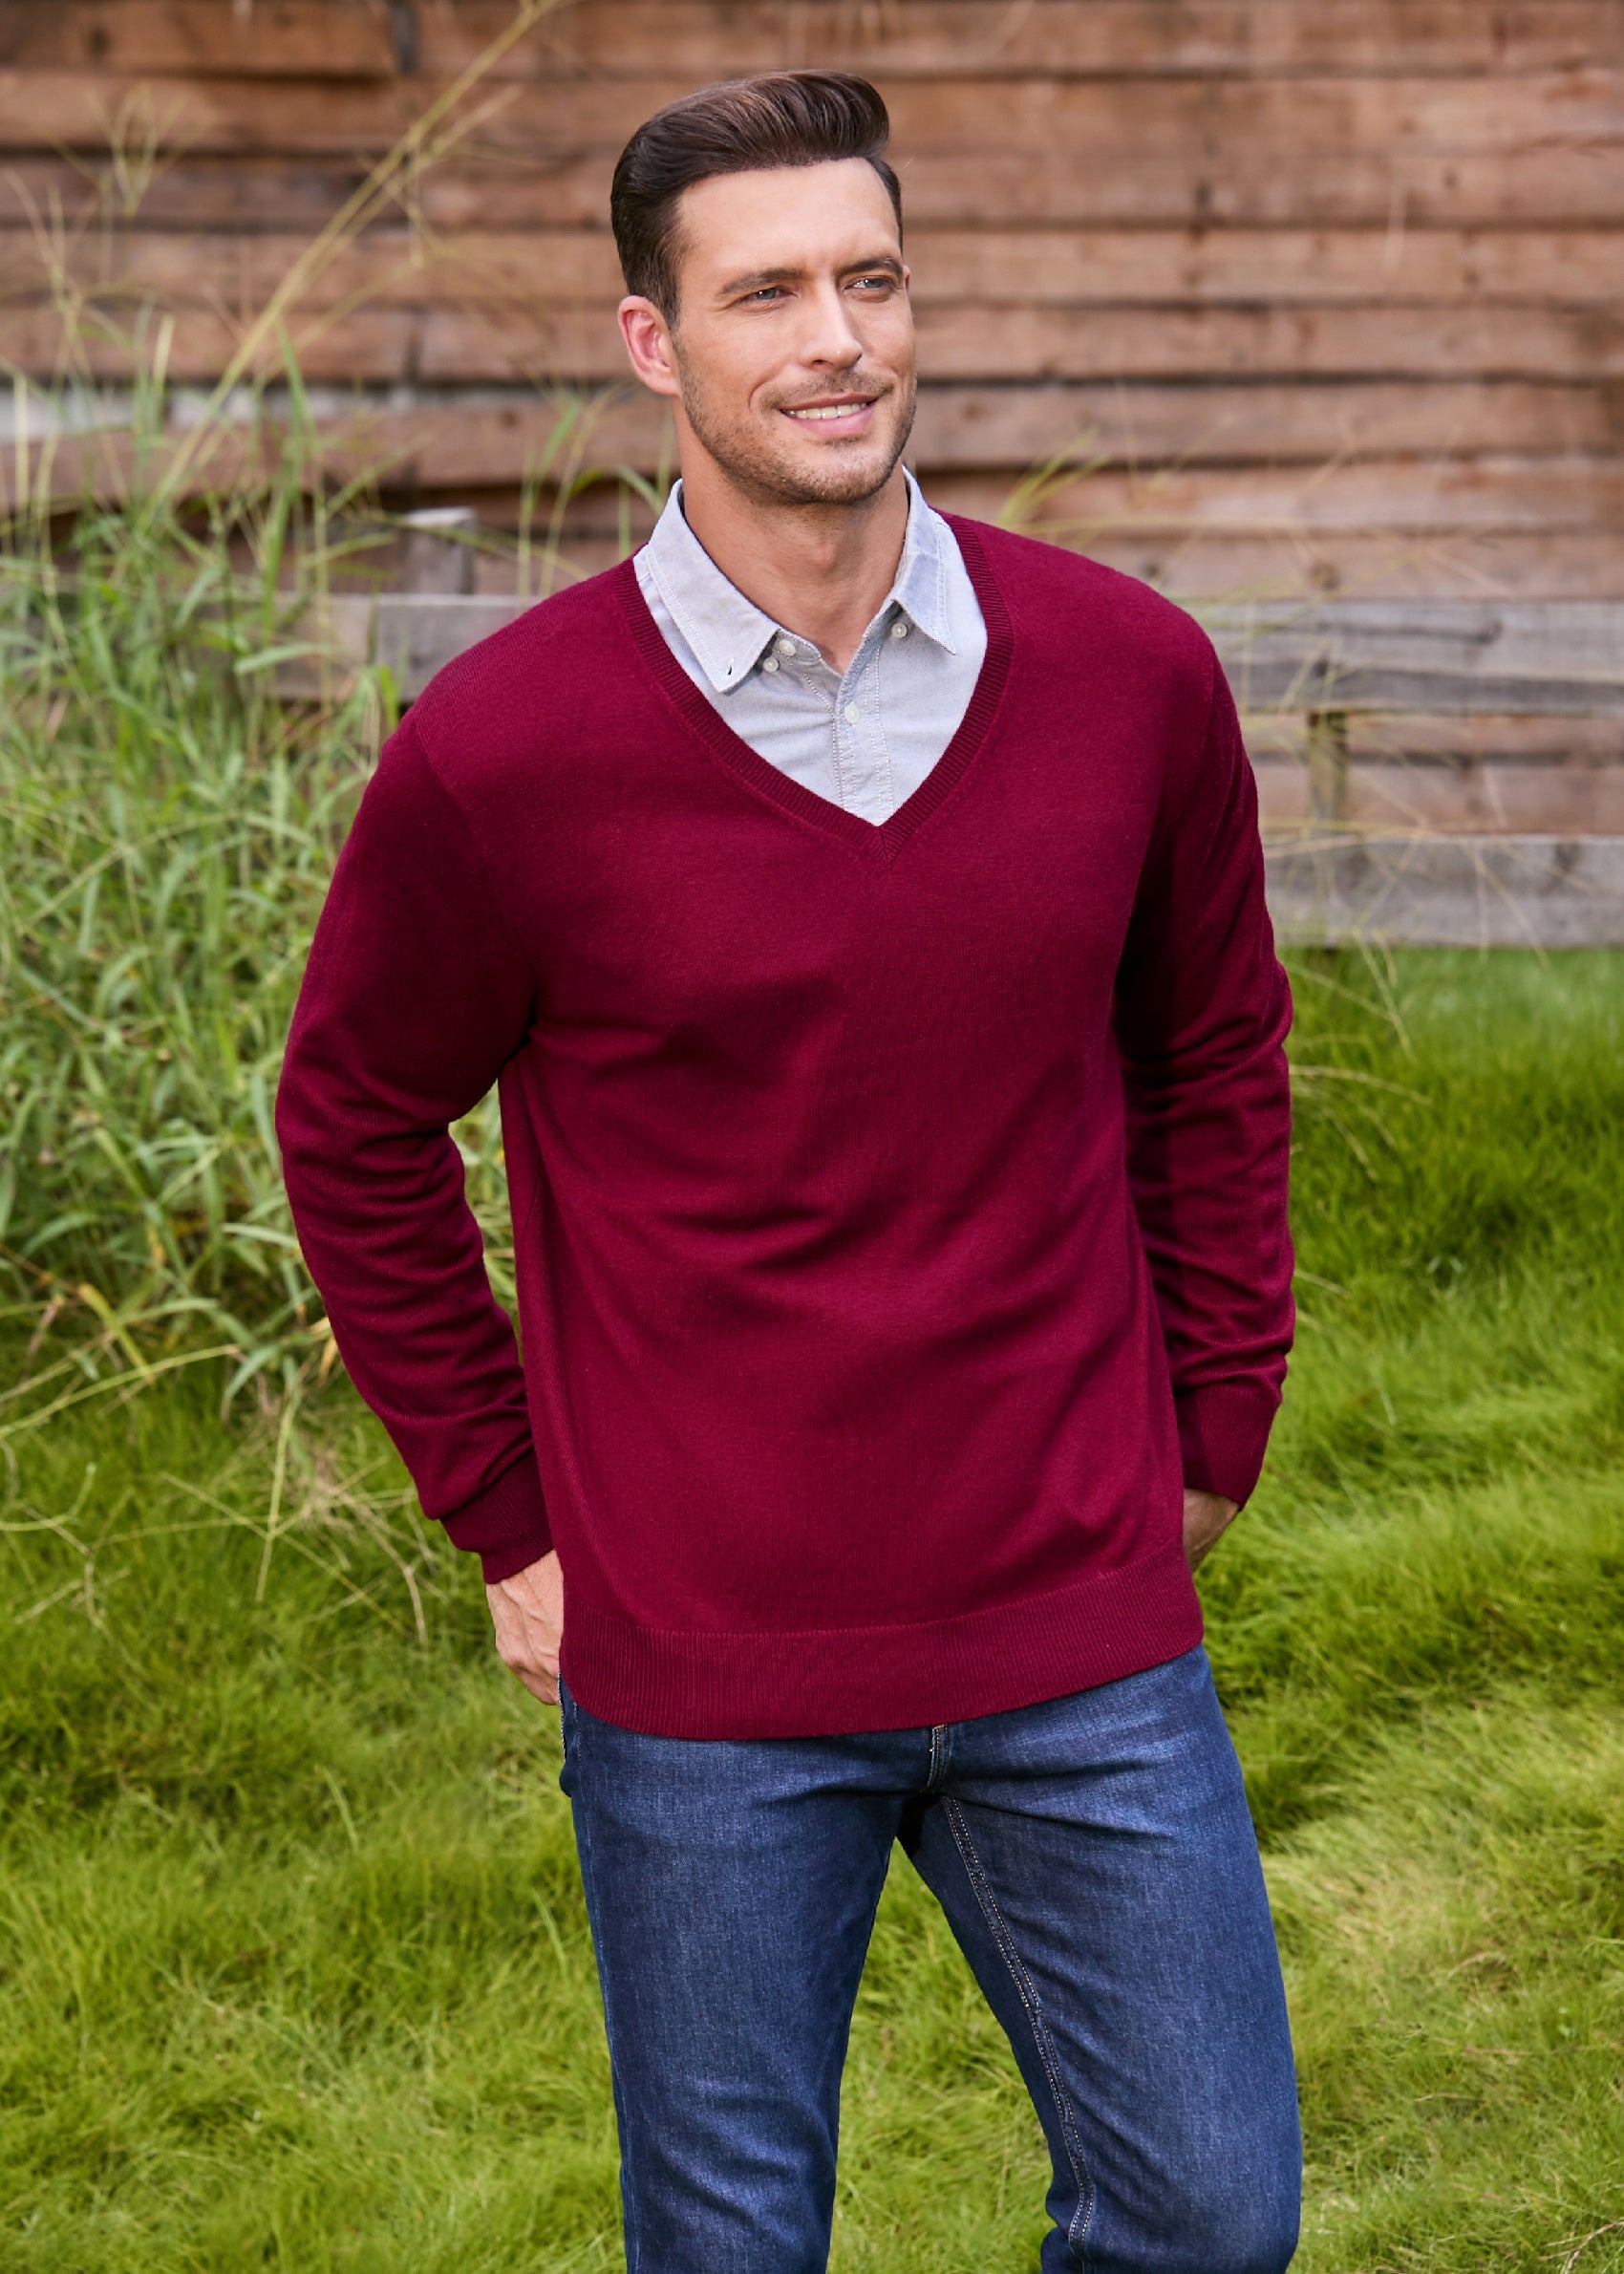 Men's V-Neck Sweaters, Big and Tall